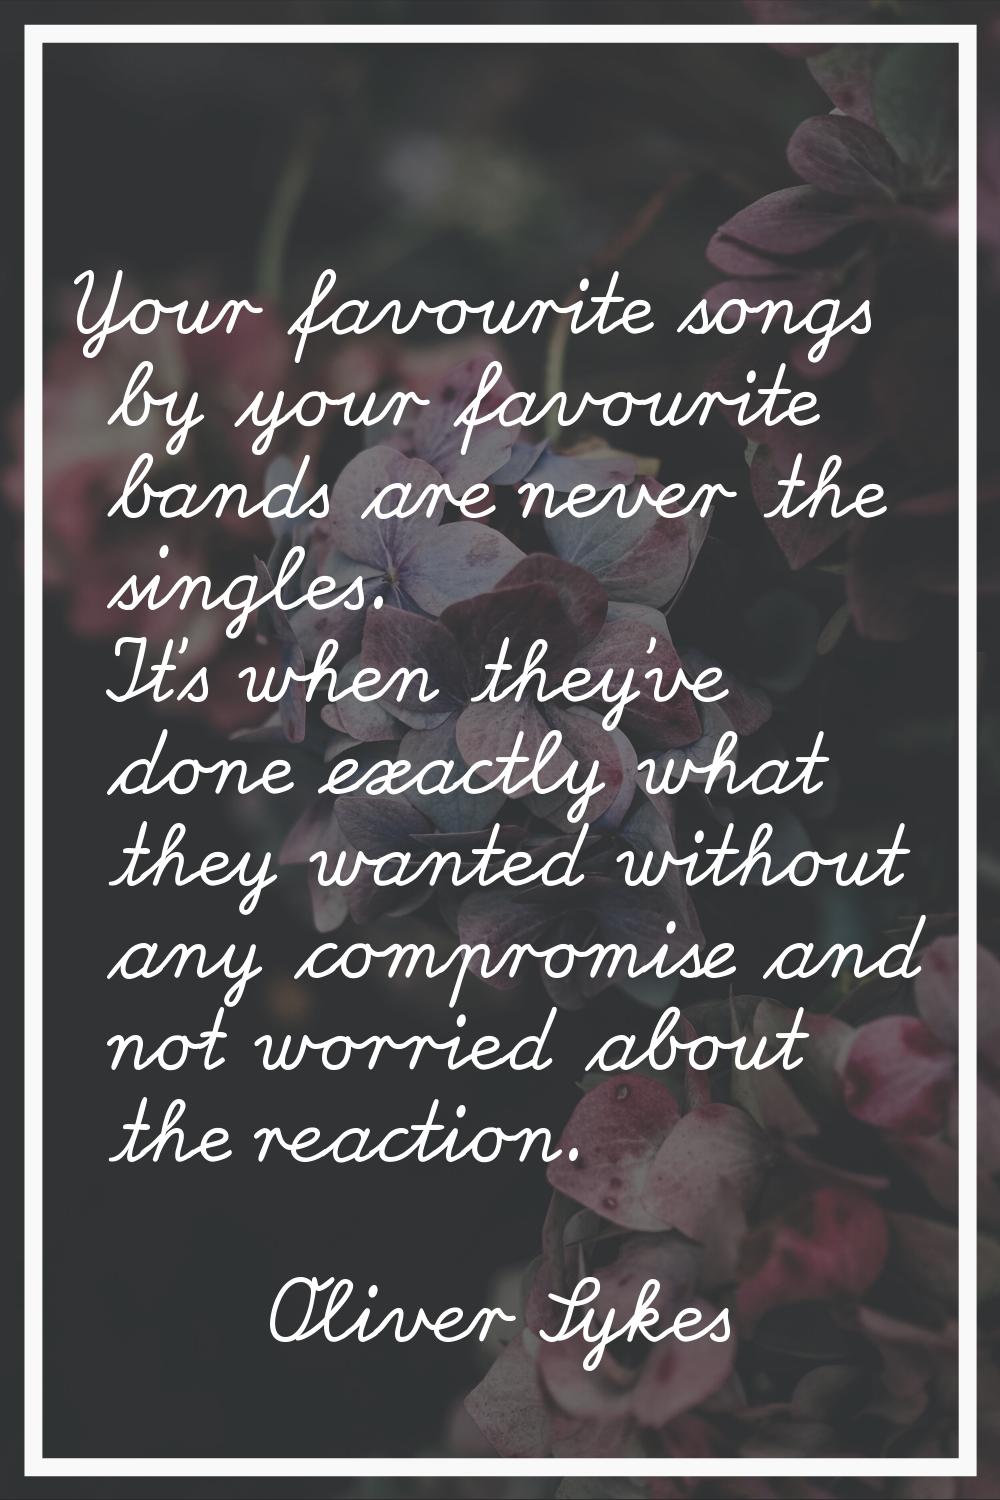 Your favourite songs by your favourite bands are never the singles. It's when they've done exactly 